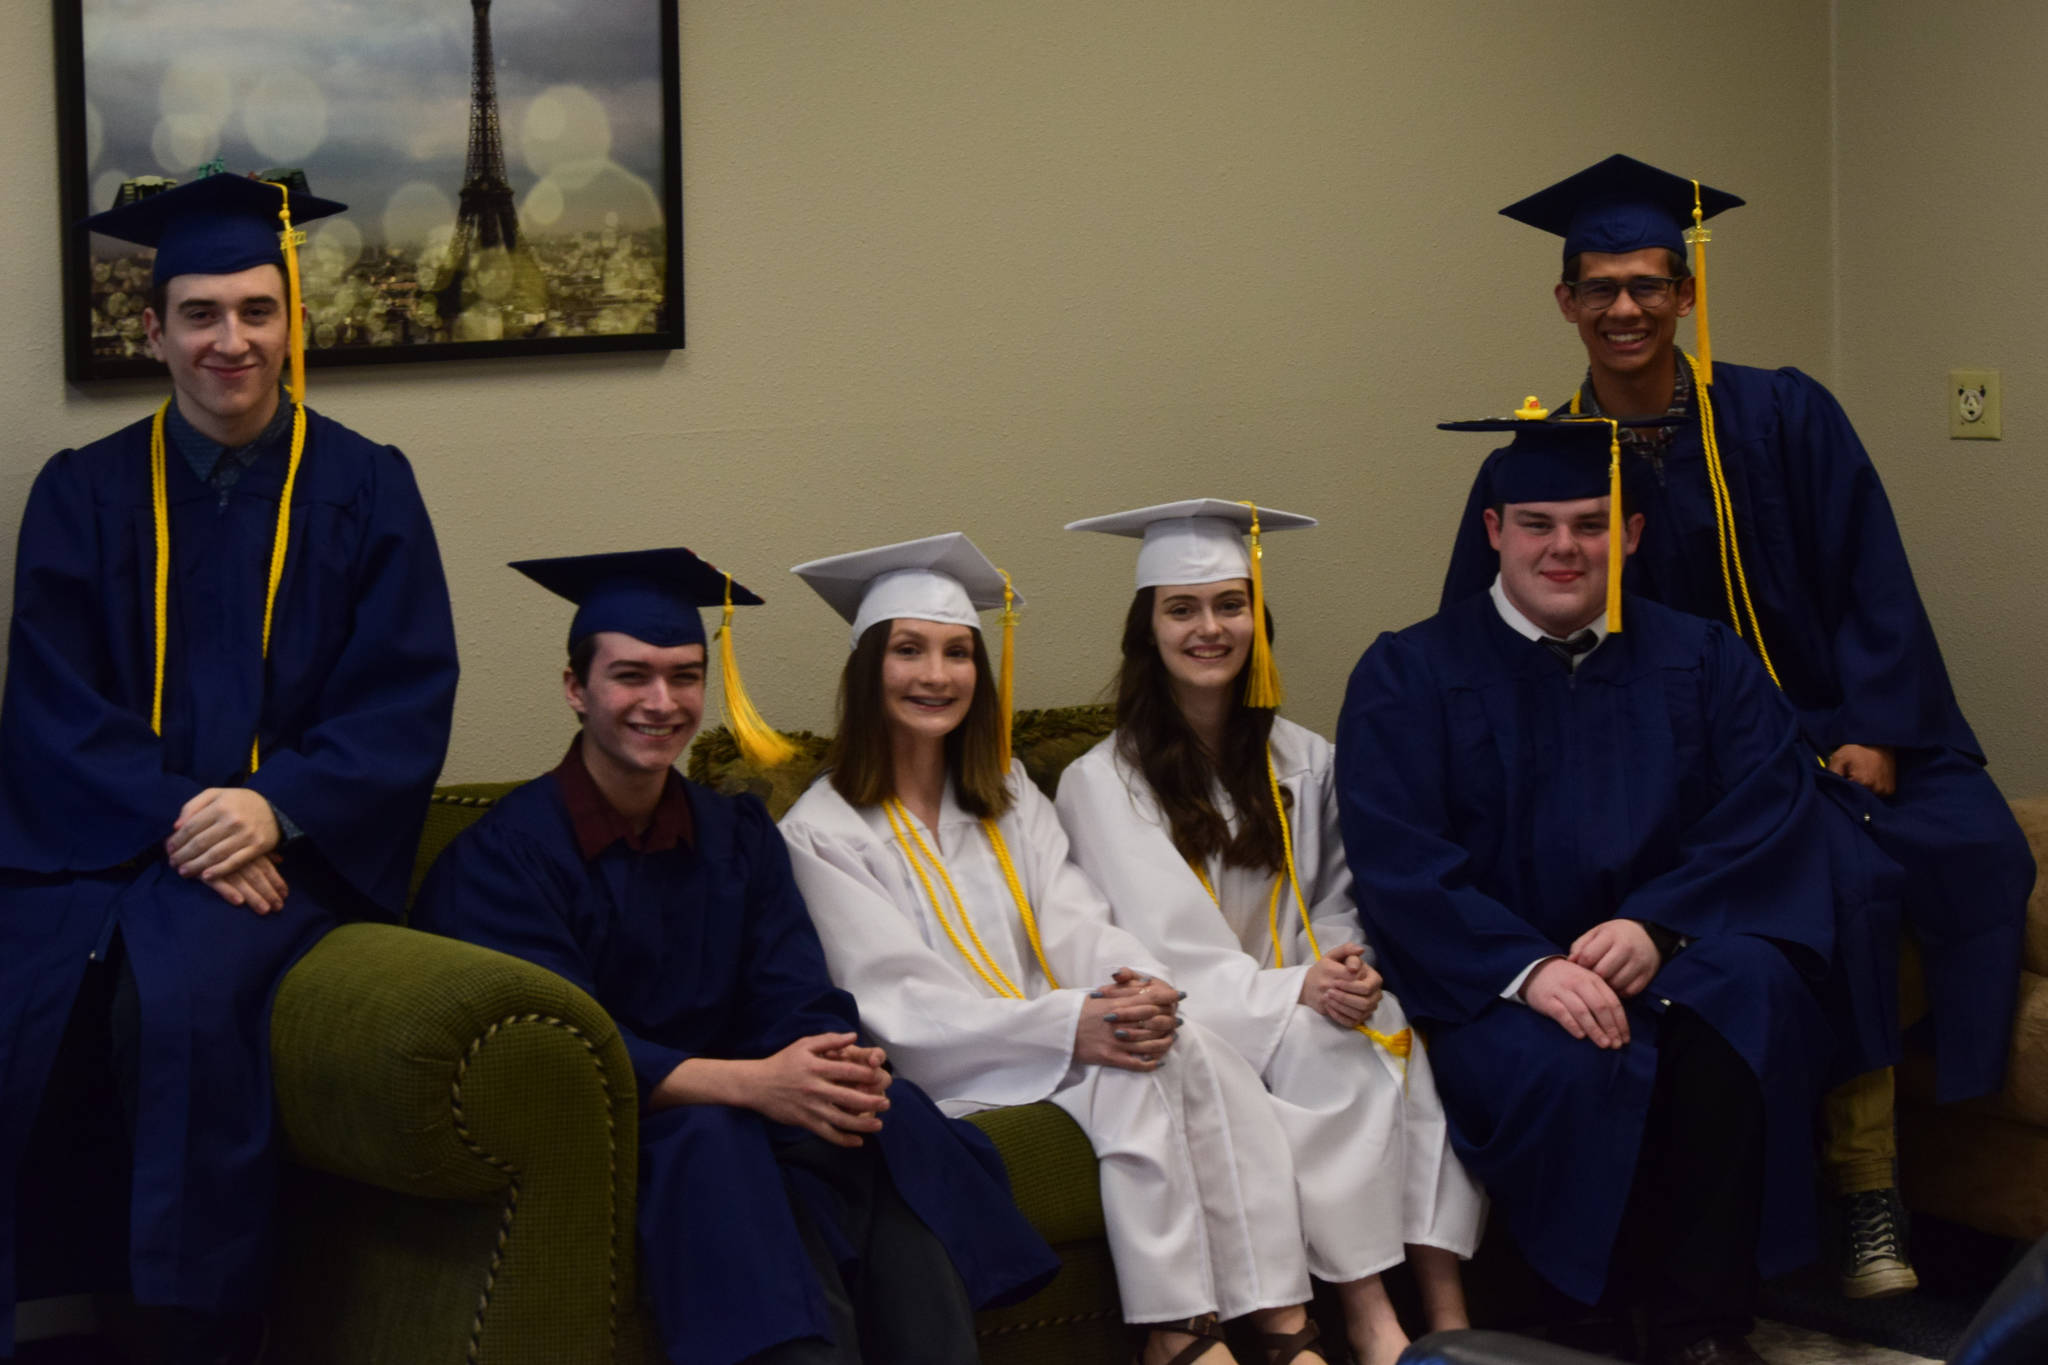 From left to right: Landon Vyhmeister, Jared Vyhmeister, Jamie Hyatt, Emily Warix, Jacob Topp and Isaac Johnson are photographed before their graduation ceremony at Cook Inlet Academy in Soldotna, Alaska on Sunday, May 9, 2021. (Camille Botello / Peninsula Clarion)